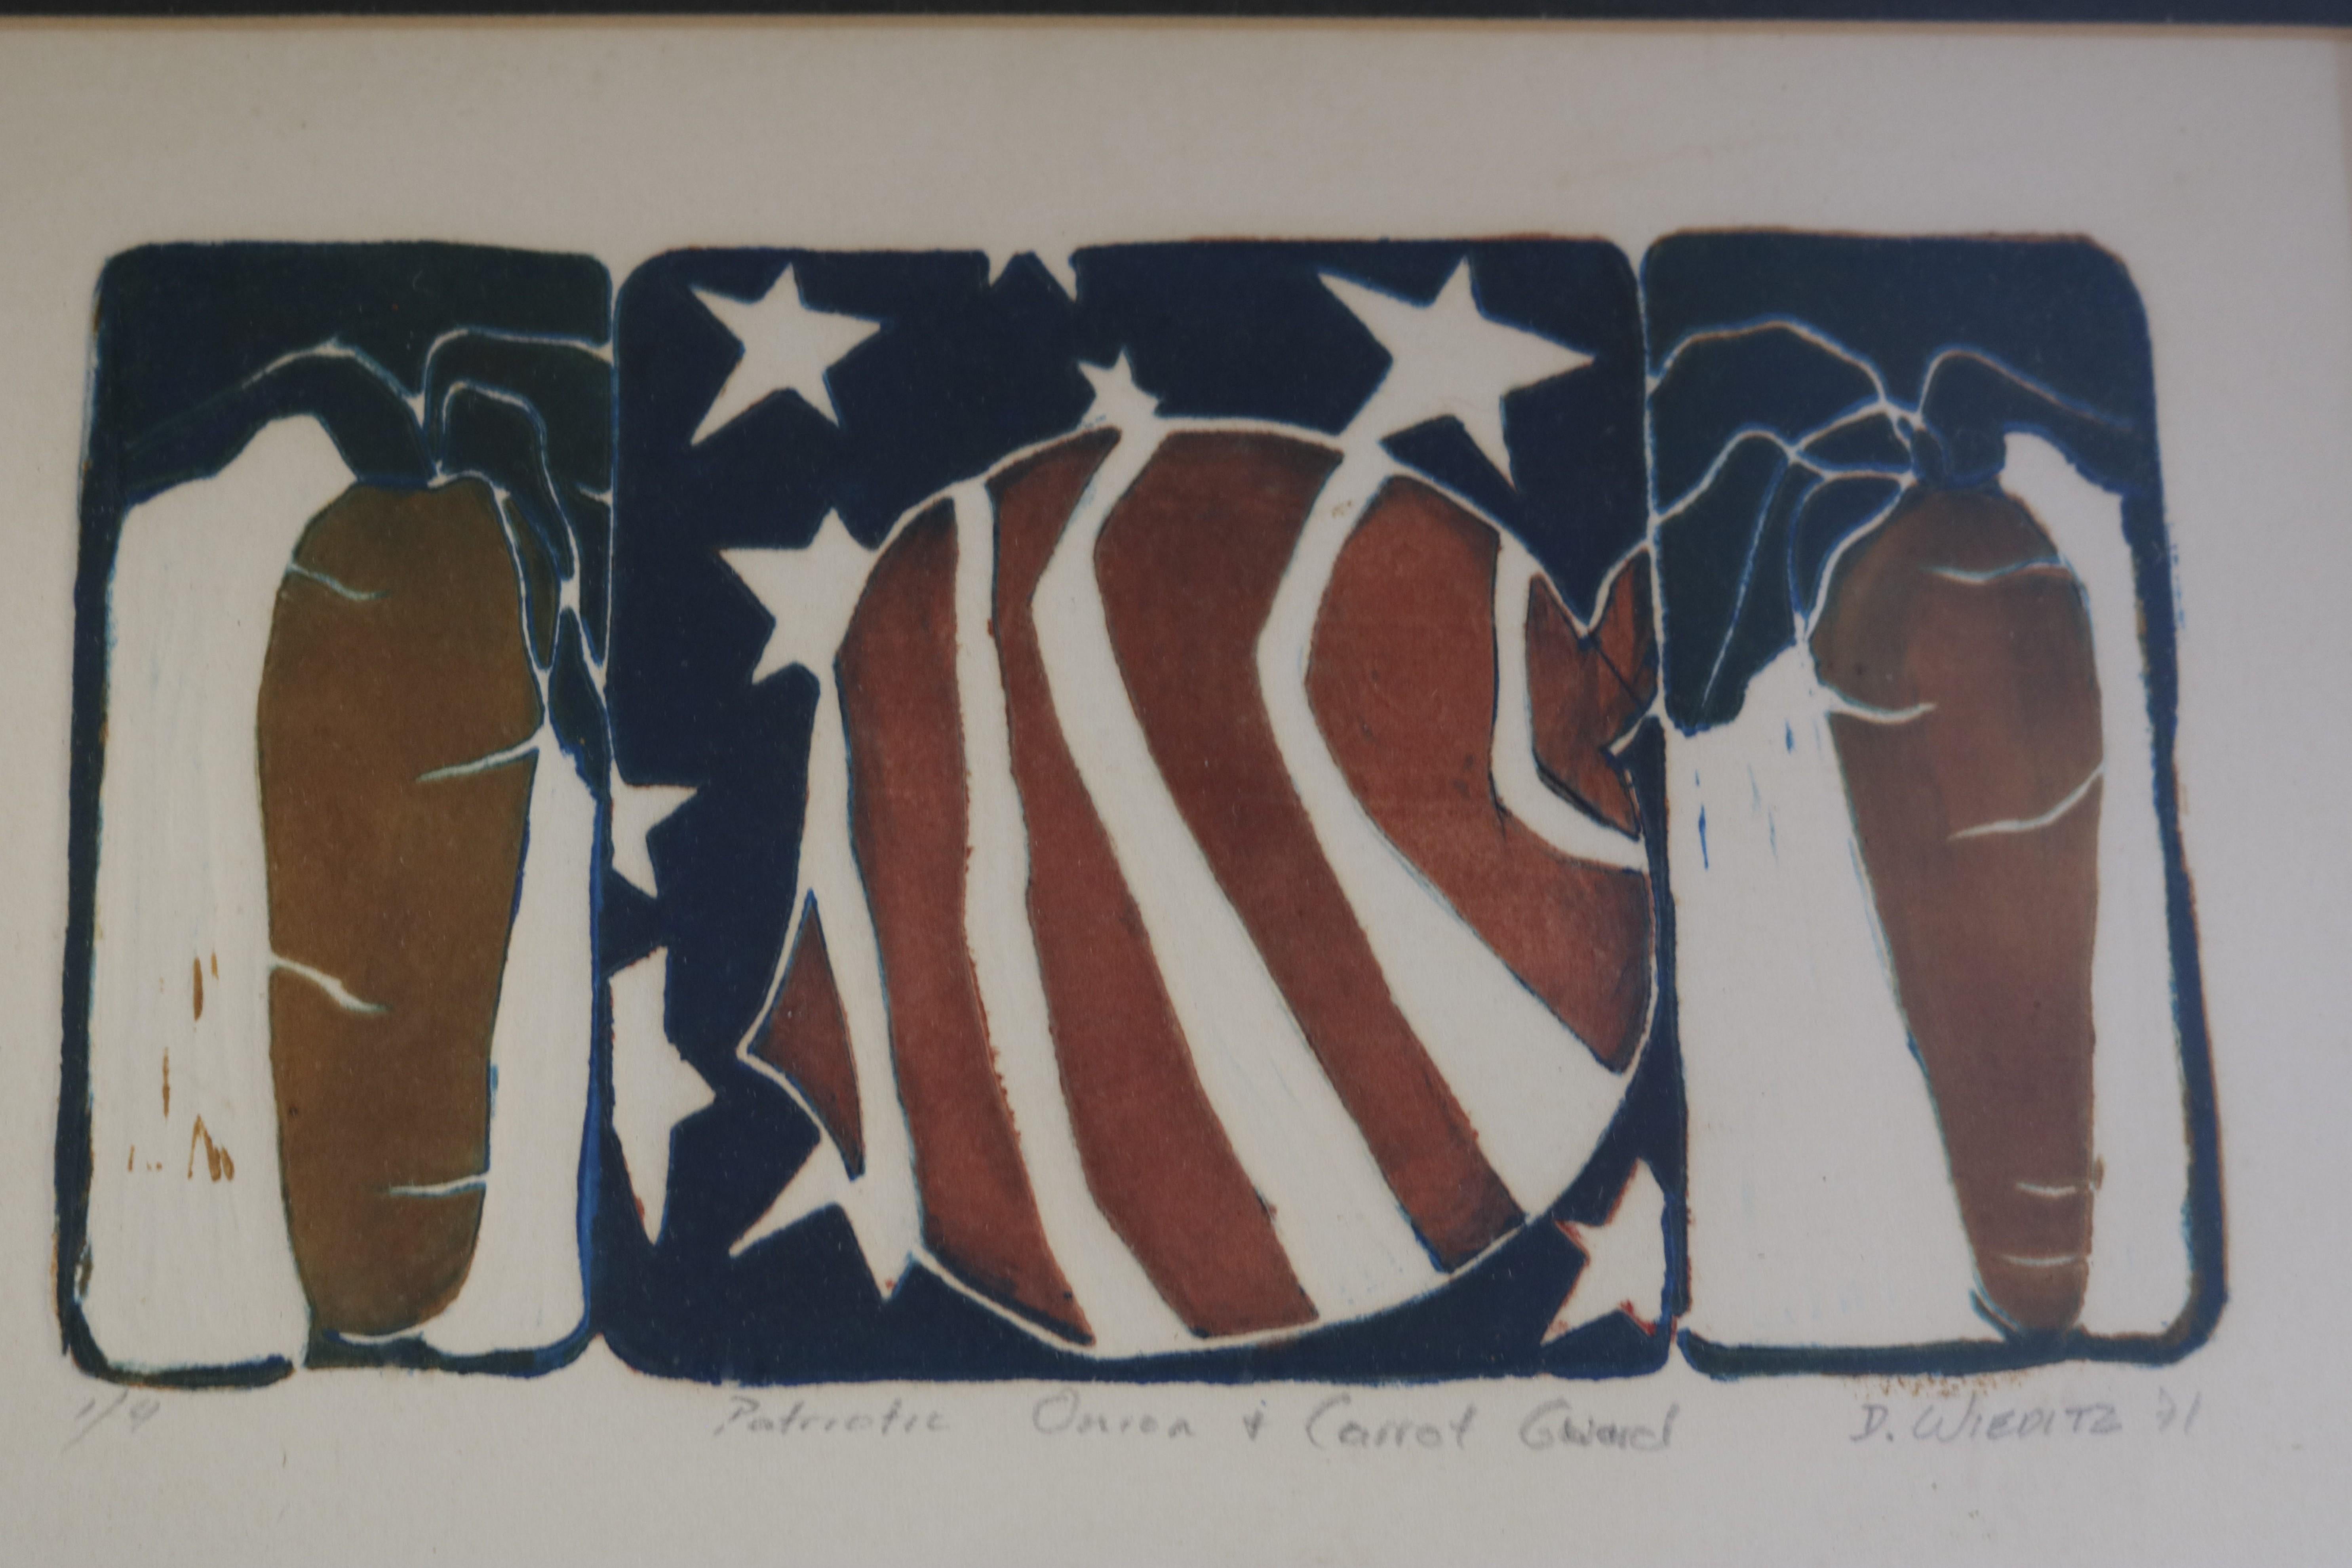 A lithograph seemingly in homage to Americana and American farm life fashioned with carrots and beets in patriotic colors.
Signed D. Wieditz, dated 1971 and numbered 1/9.
The lithograph retains its original framing and chrome frame.